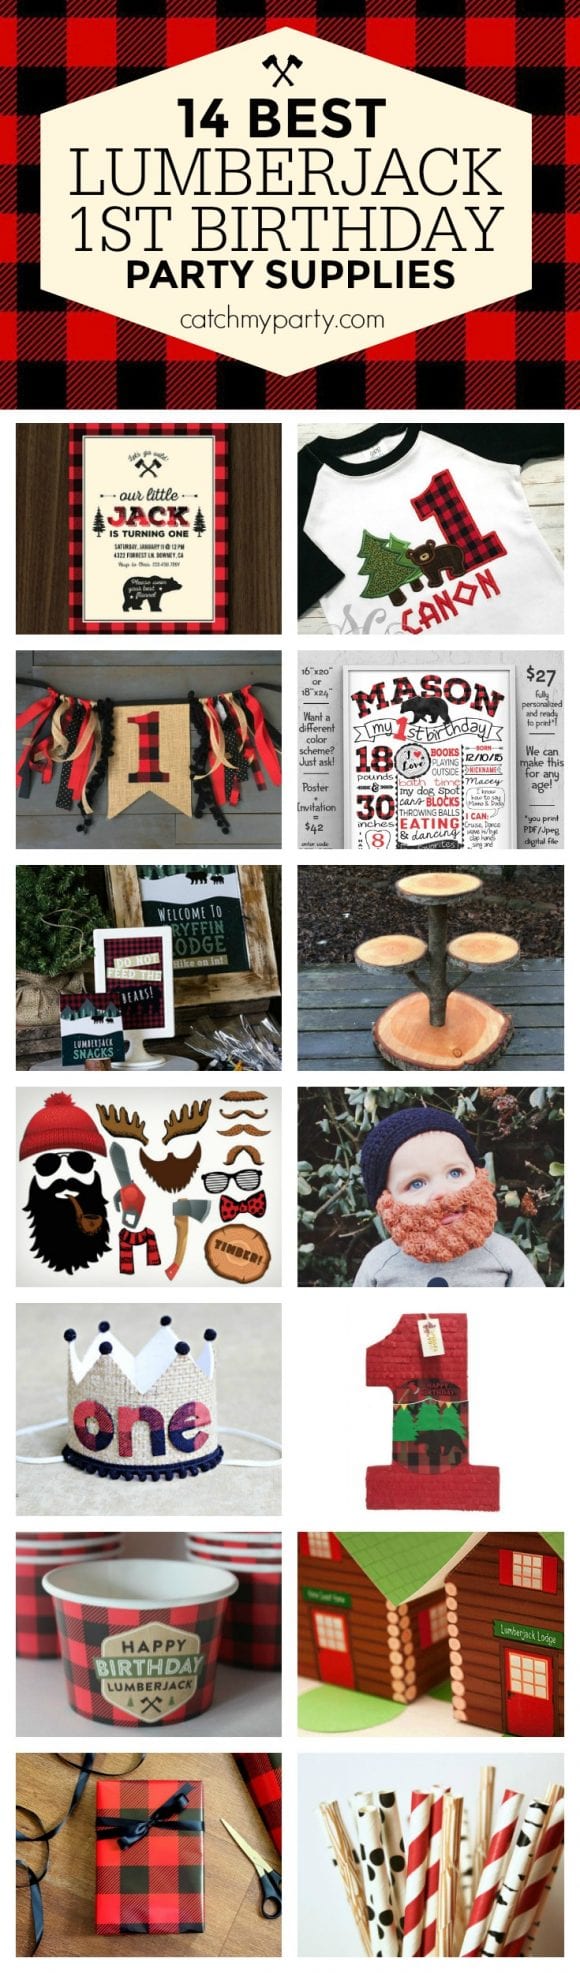 Best Lumberjack 1st Birthday Party Supplies | CatchMyparty.com